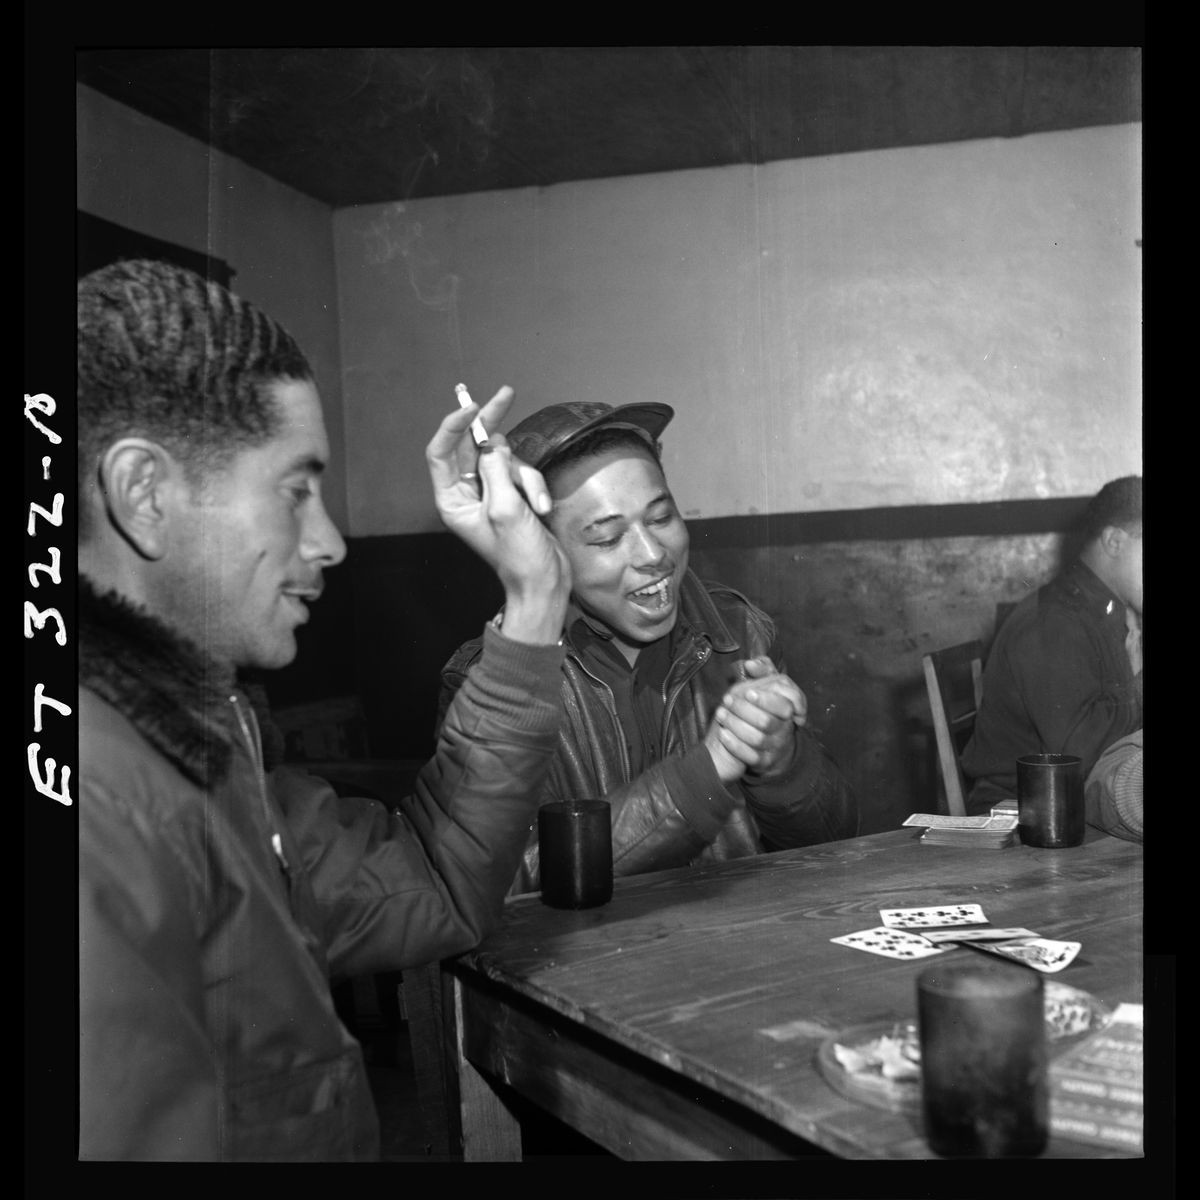 Tuskegee airmen playing cards in the officers' club in the evening by Toni Frissell - March 1945